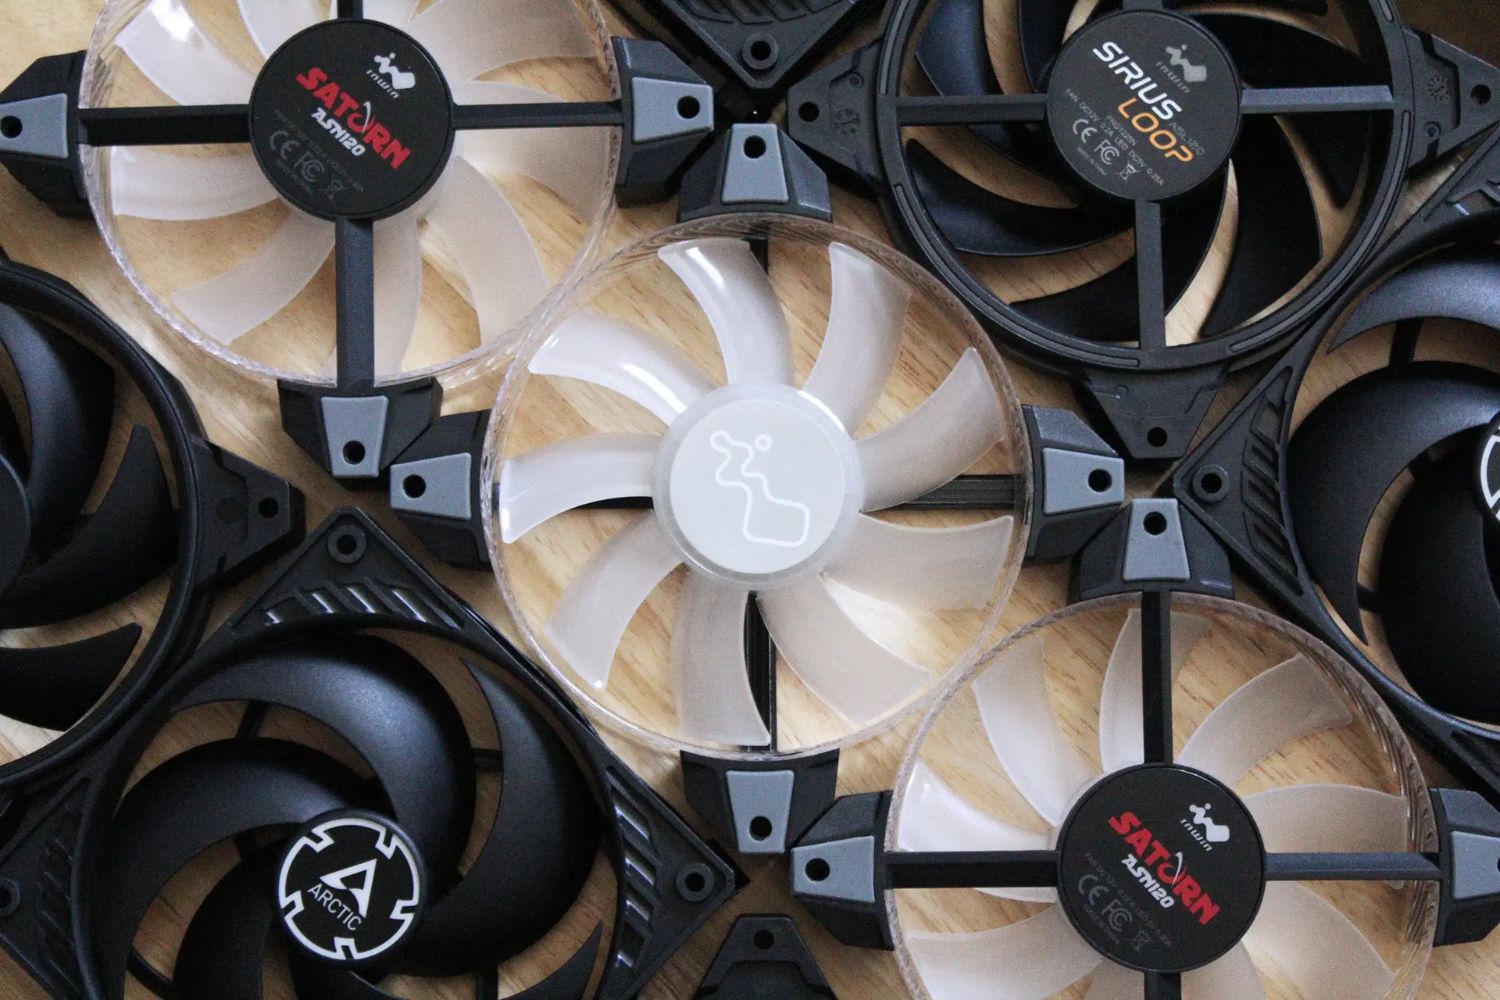 Why Do PC Case Fans Only Blow Outward